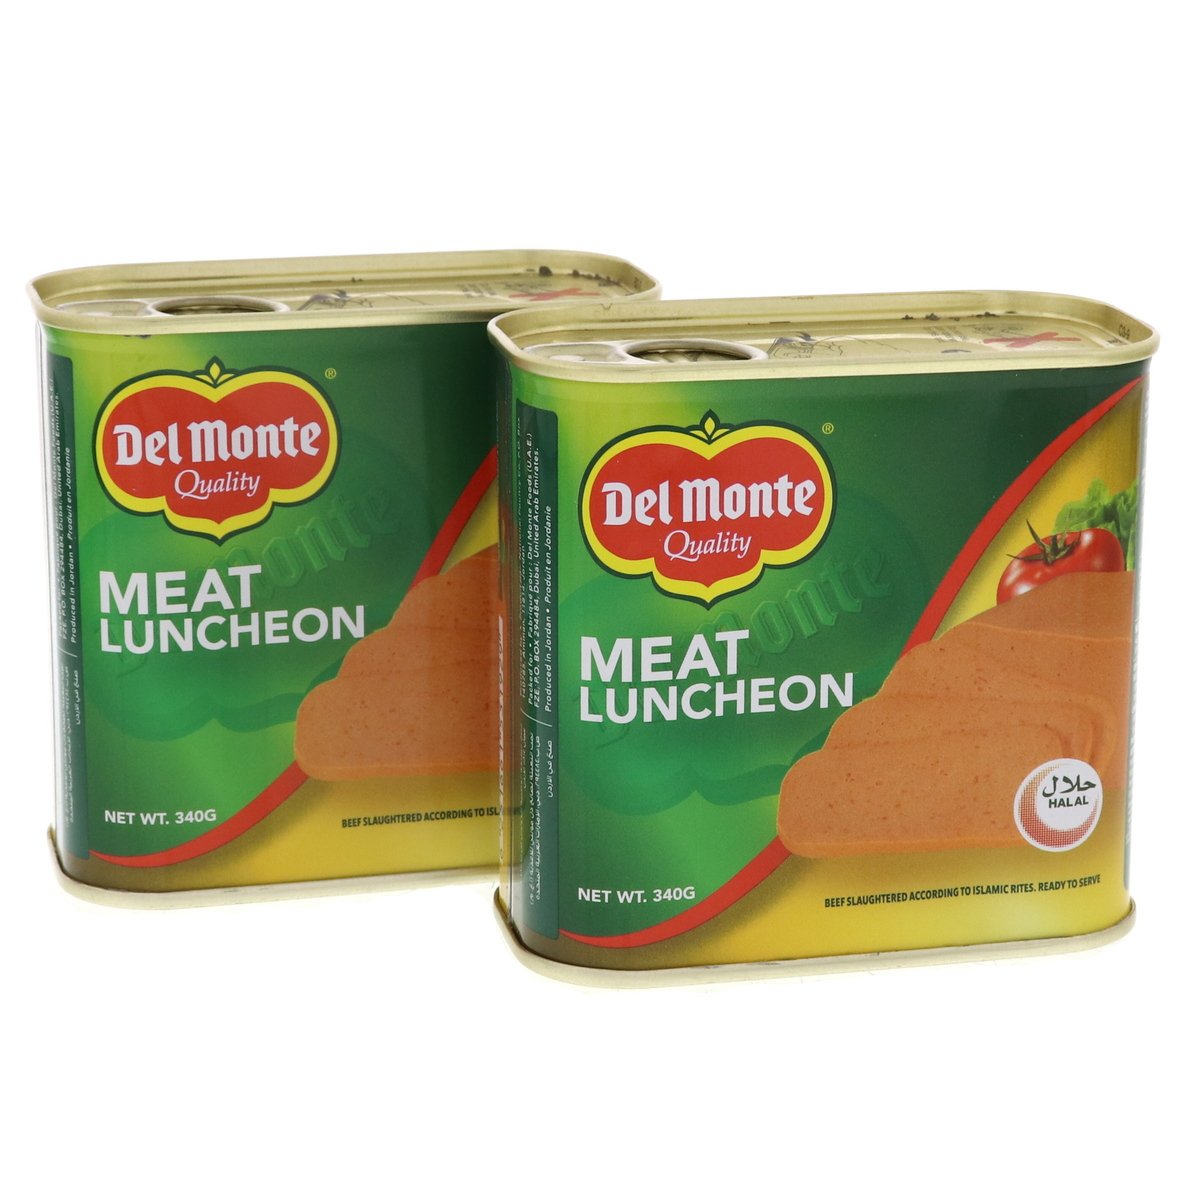 Del Monte Beef Luncheon Meat Value Pack 2 x 340 g